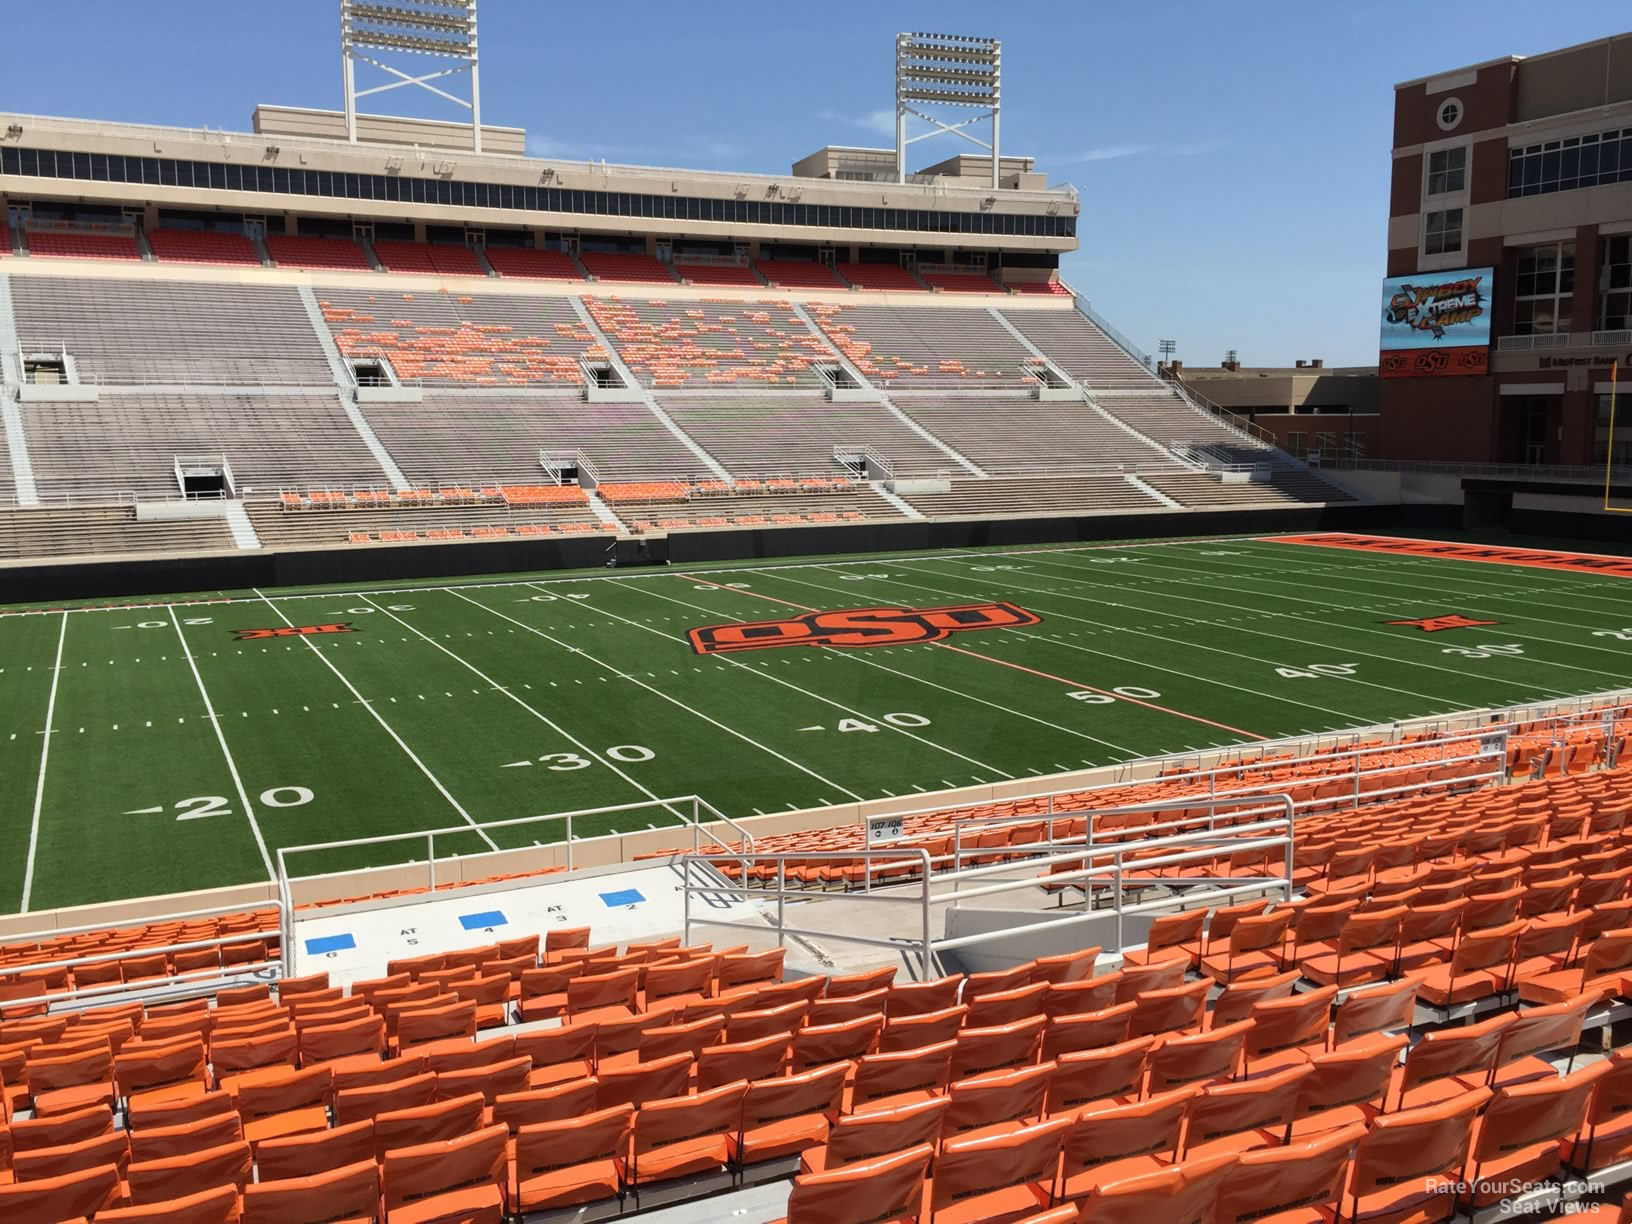 section 208, row 20 seat view  - boone pickens stadium